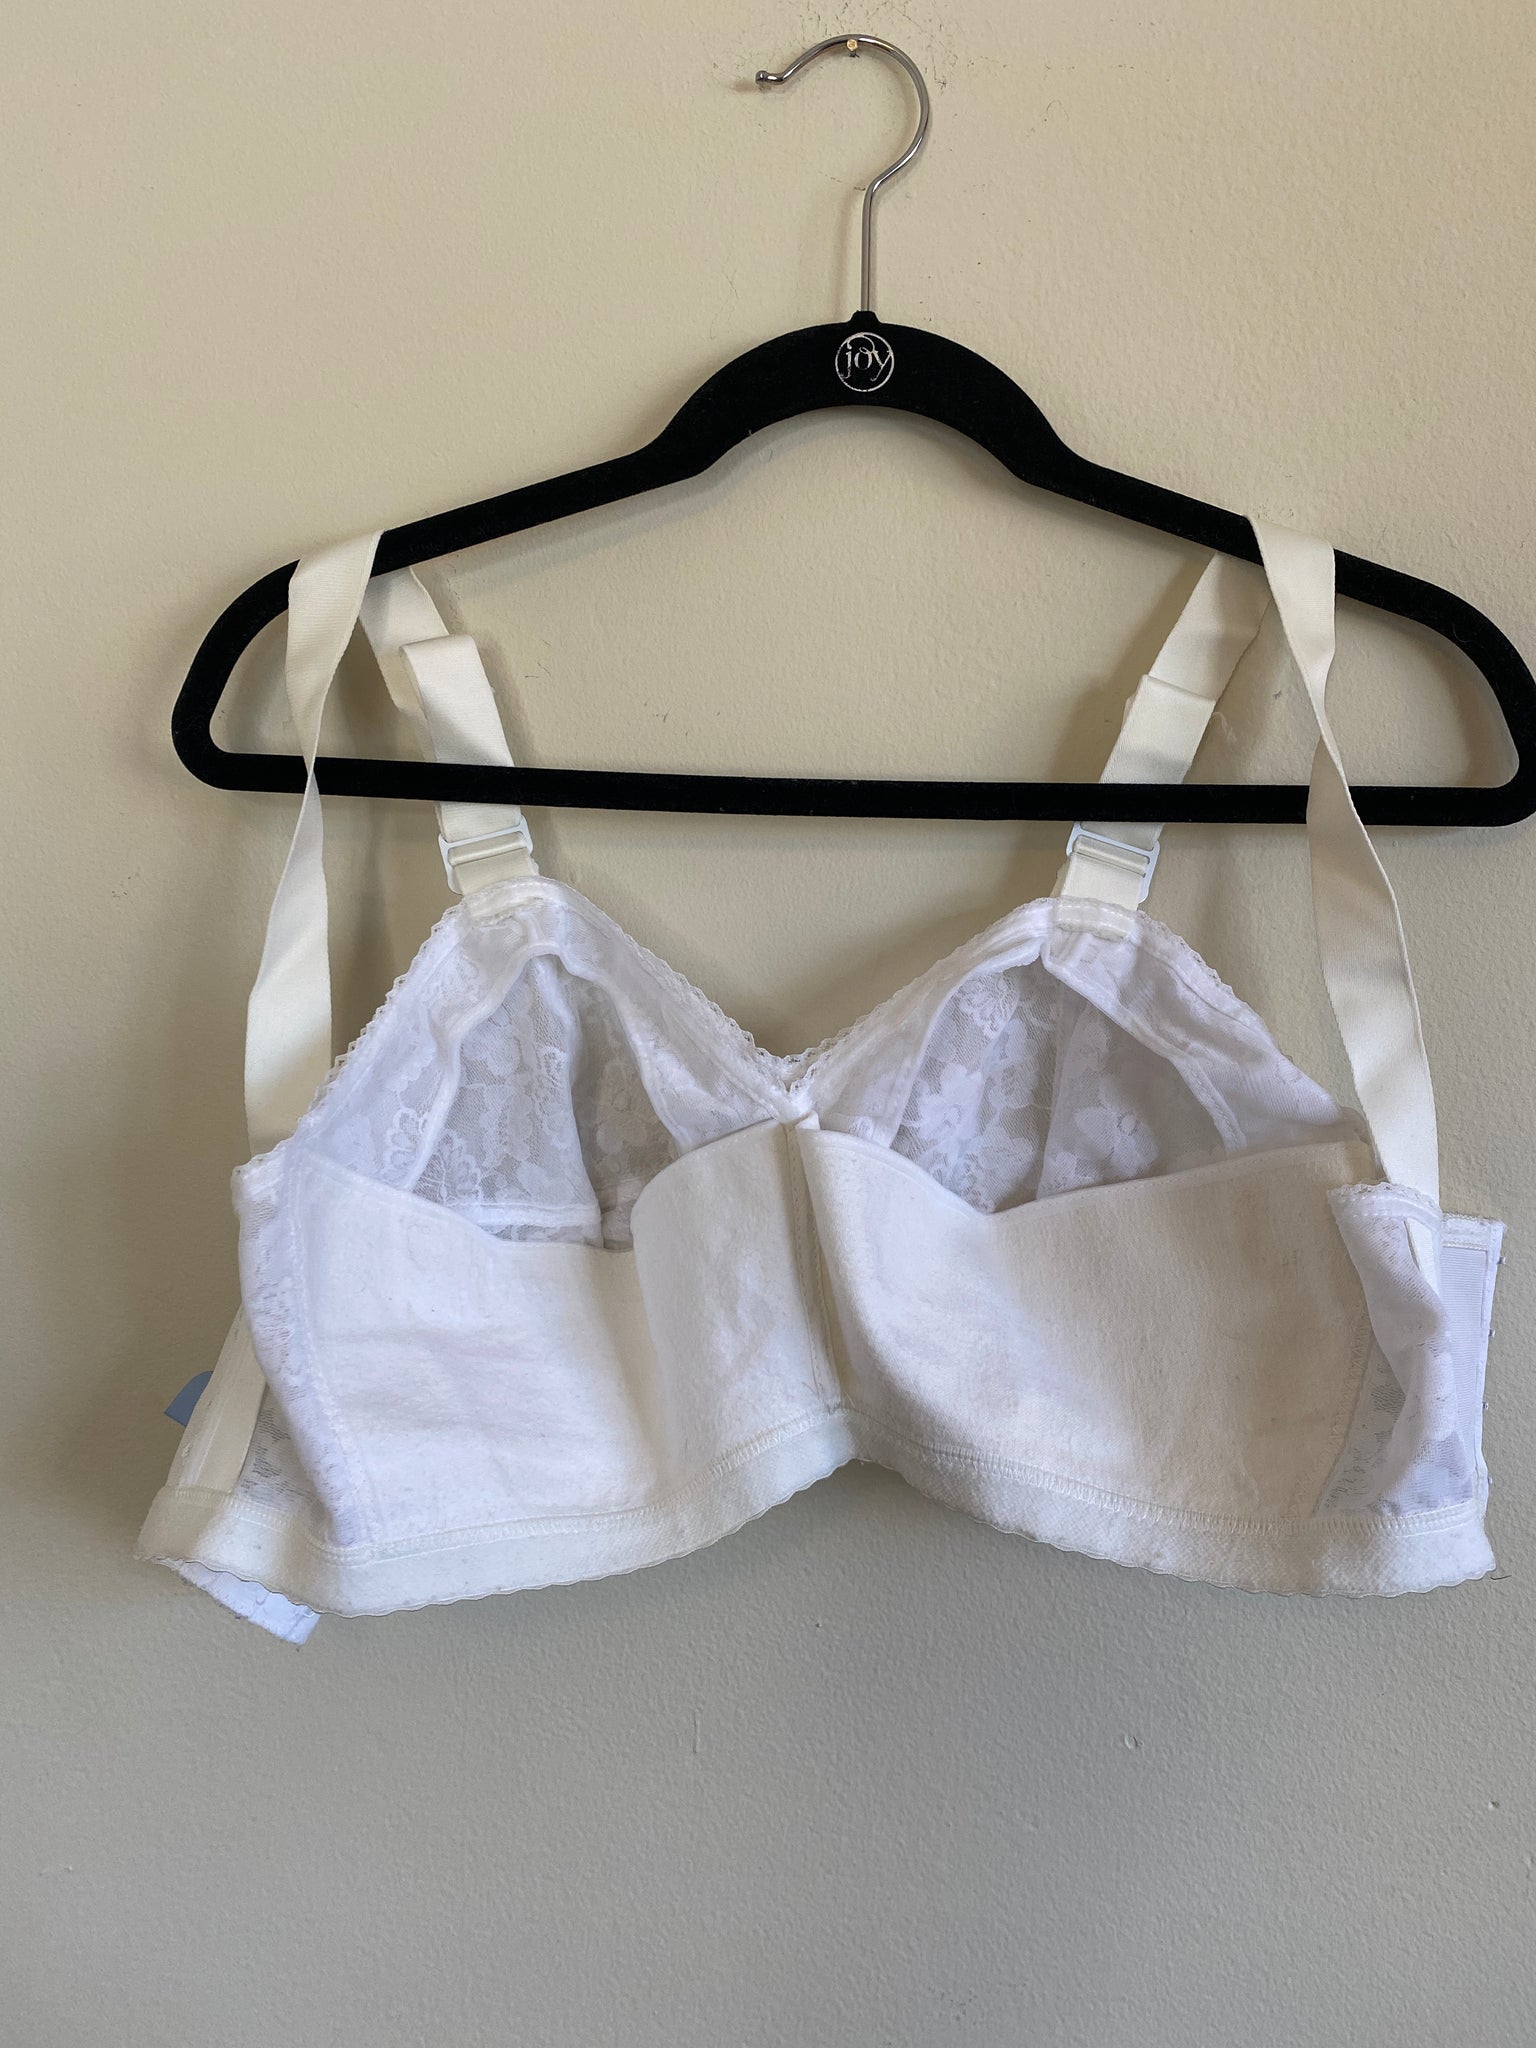 Vintage White Lace Cone Bullet Bra Bralette With Front Hook